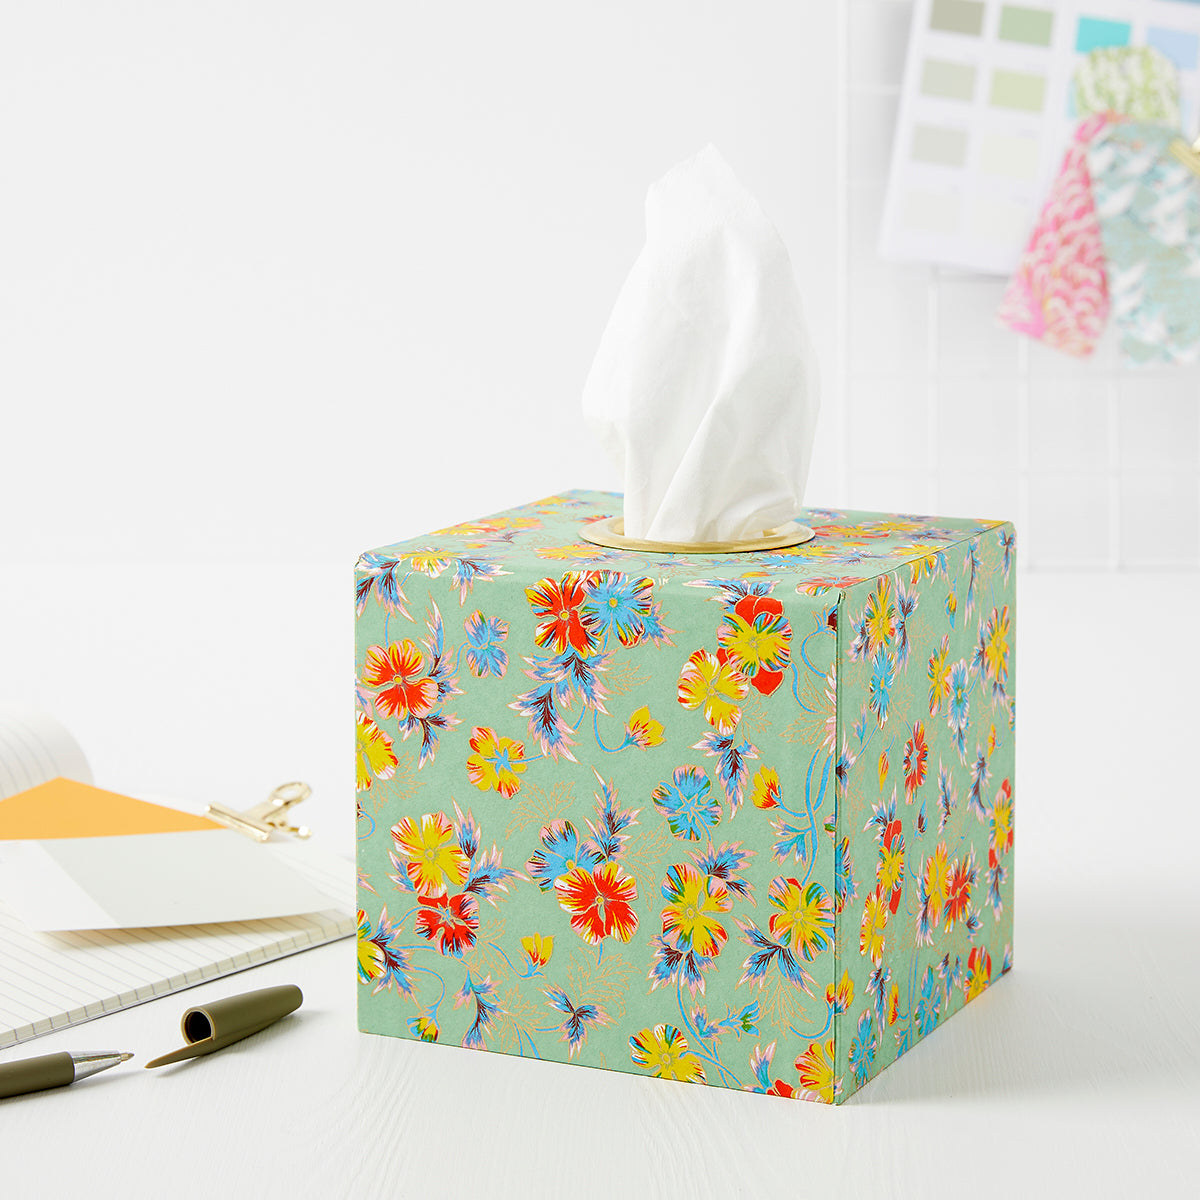 Patterned Tissue Boxes